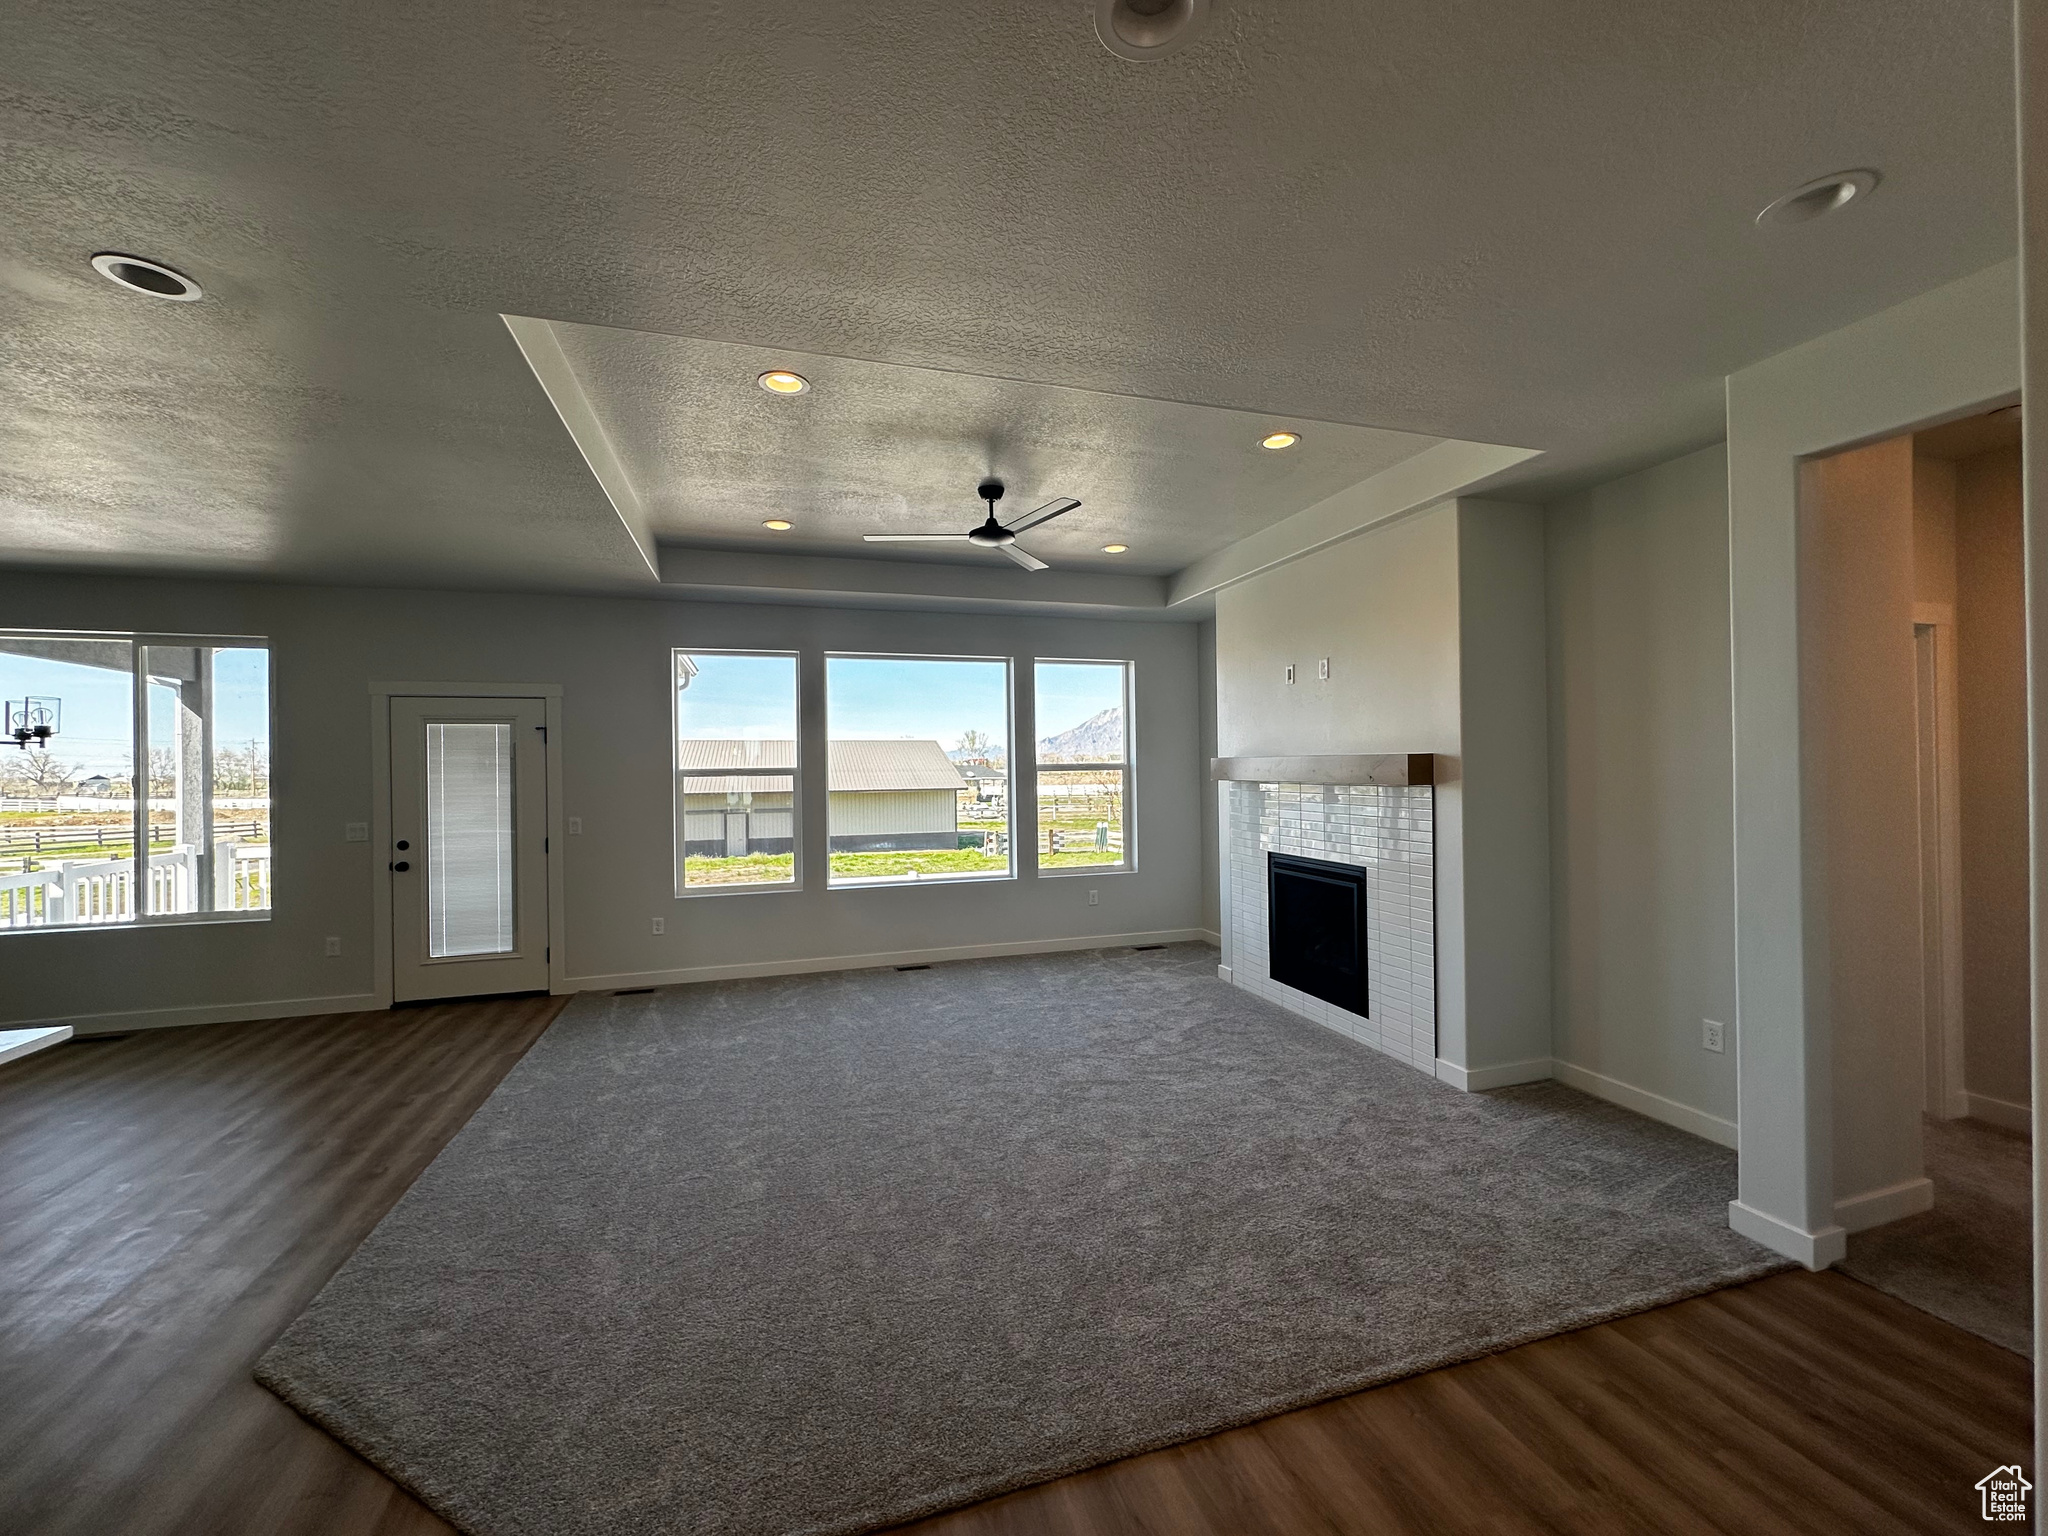 Unfurnished living room with a fireplace, dark colored carpet, ceiling fan, and a textured ceiling